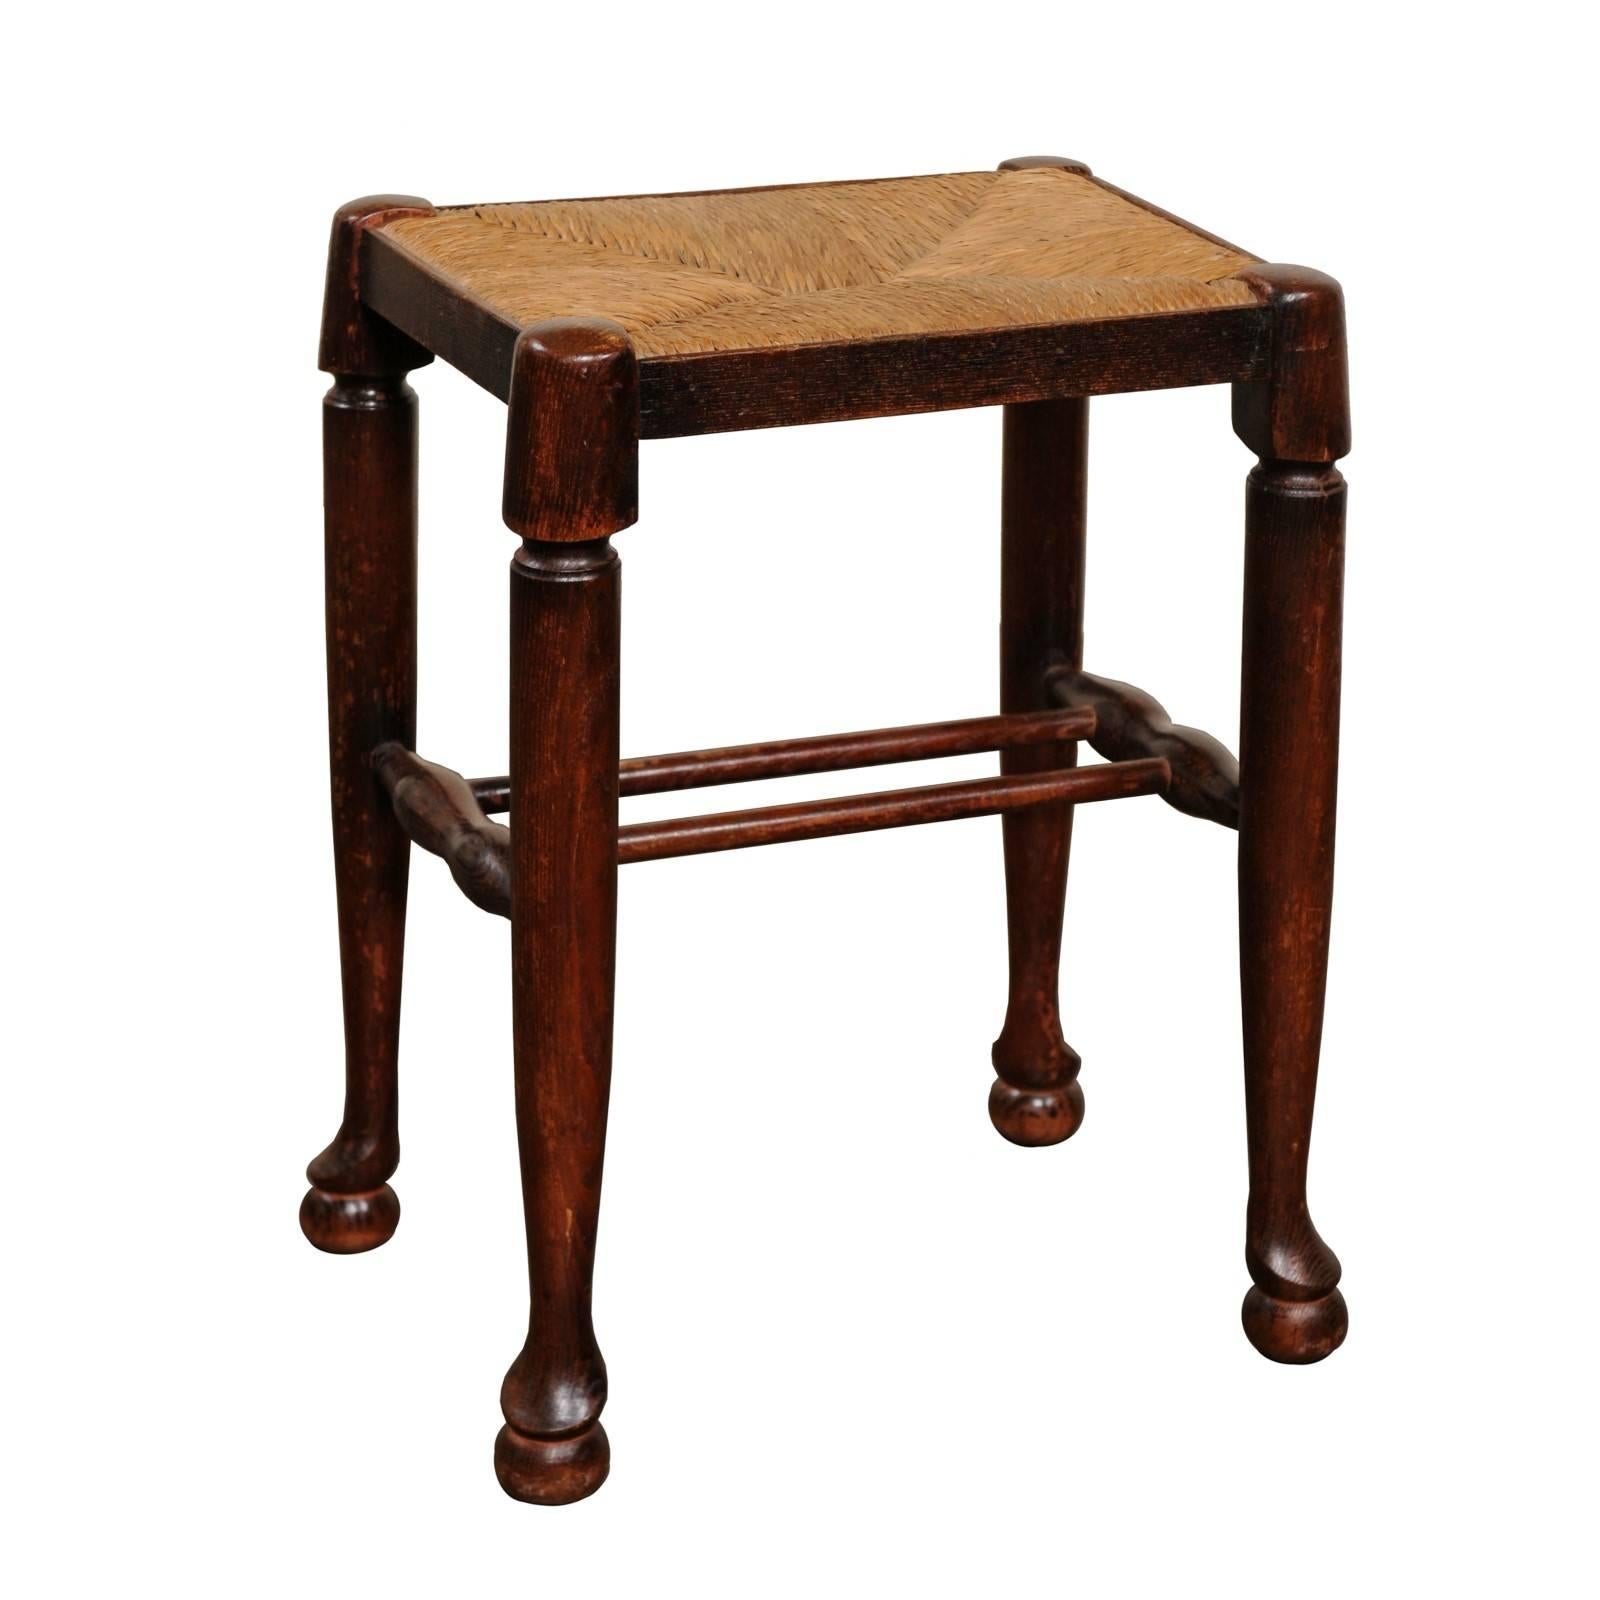 English Petite Oak Stool with Rectangular Rush Seat from the Late 19th Century